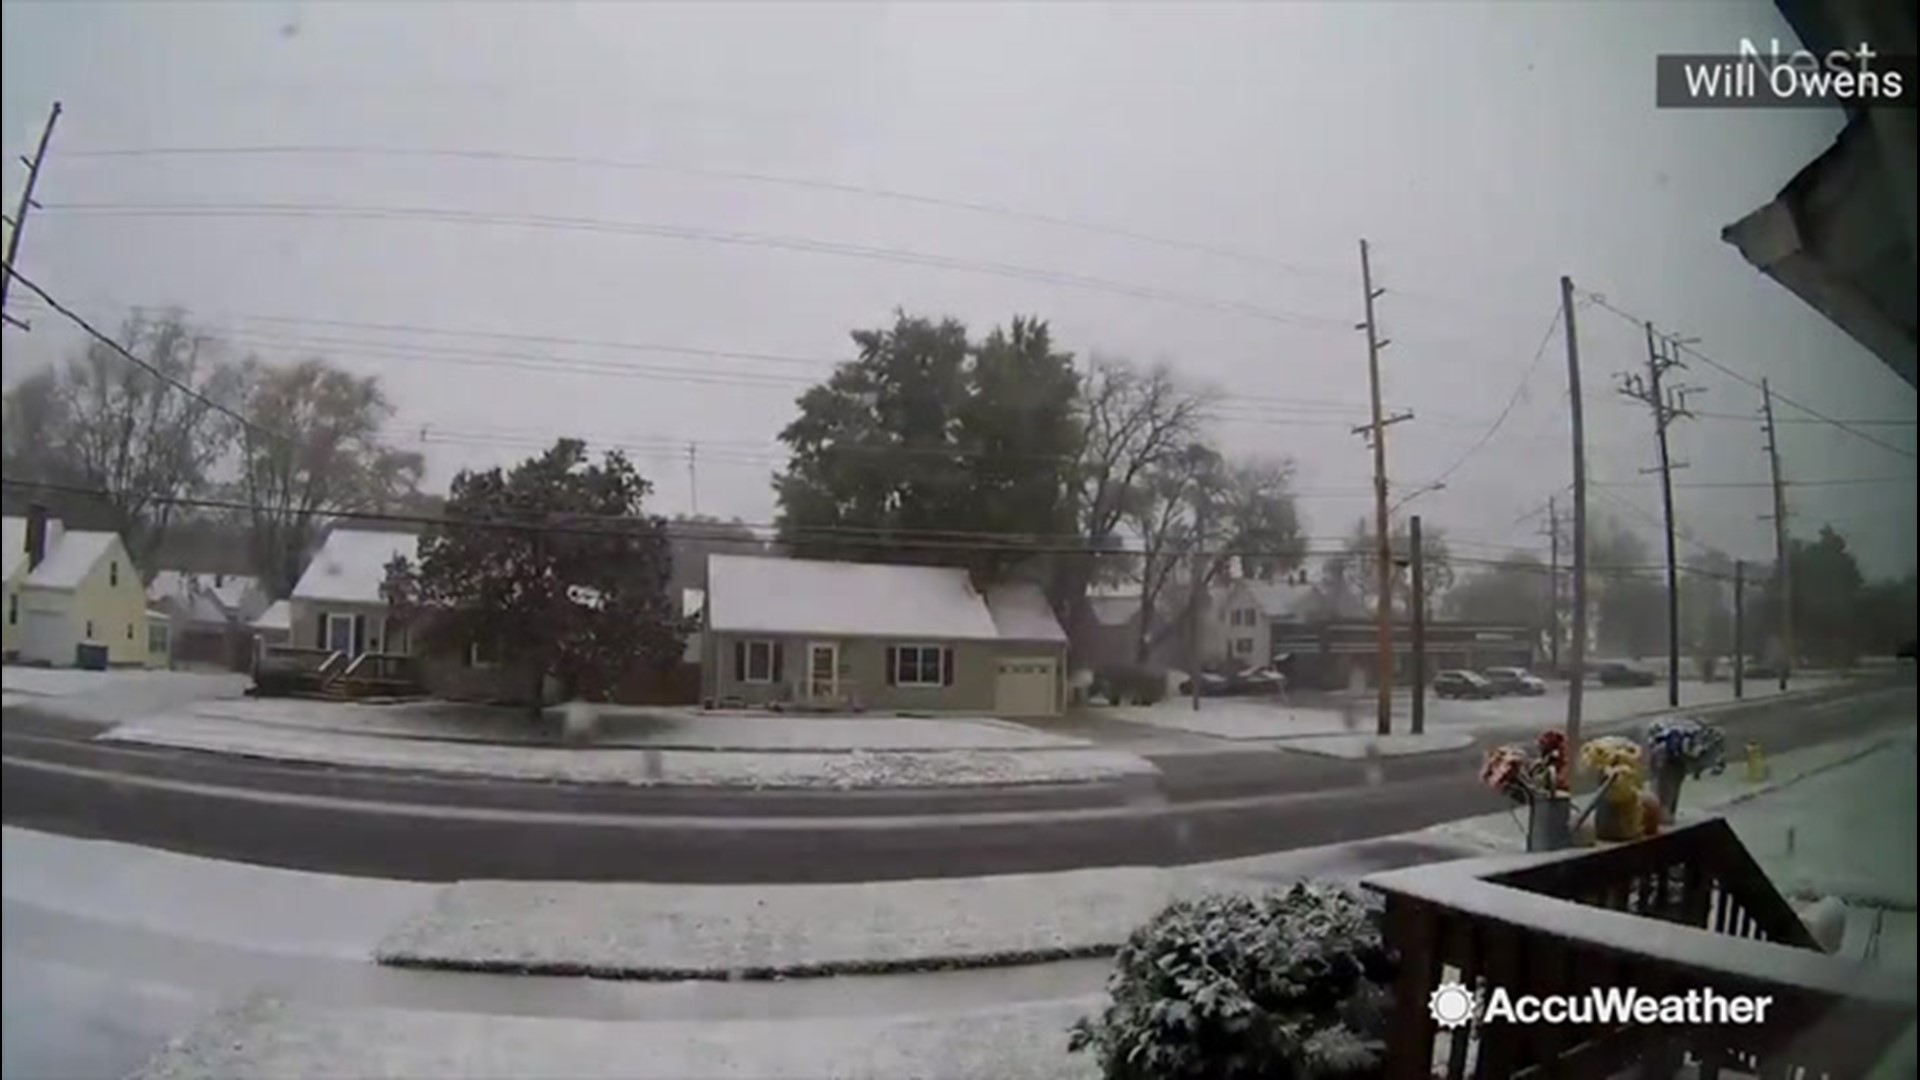 In this time-lapse of Chicago, Illinois, on Nov. 11, we see a snow storm in action as snow piles up on the ground.